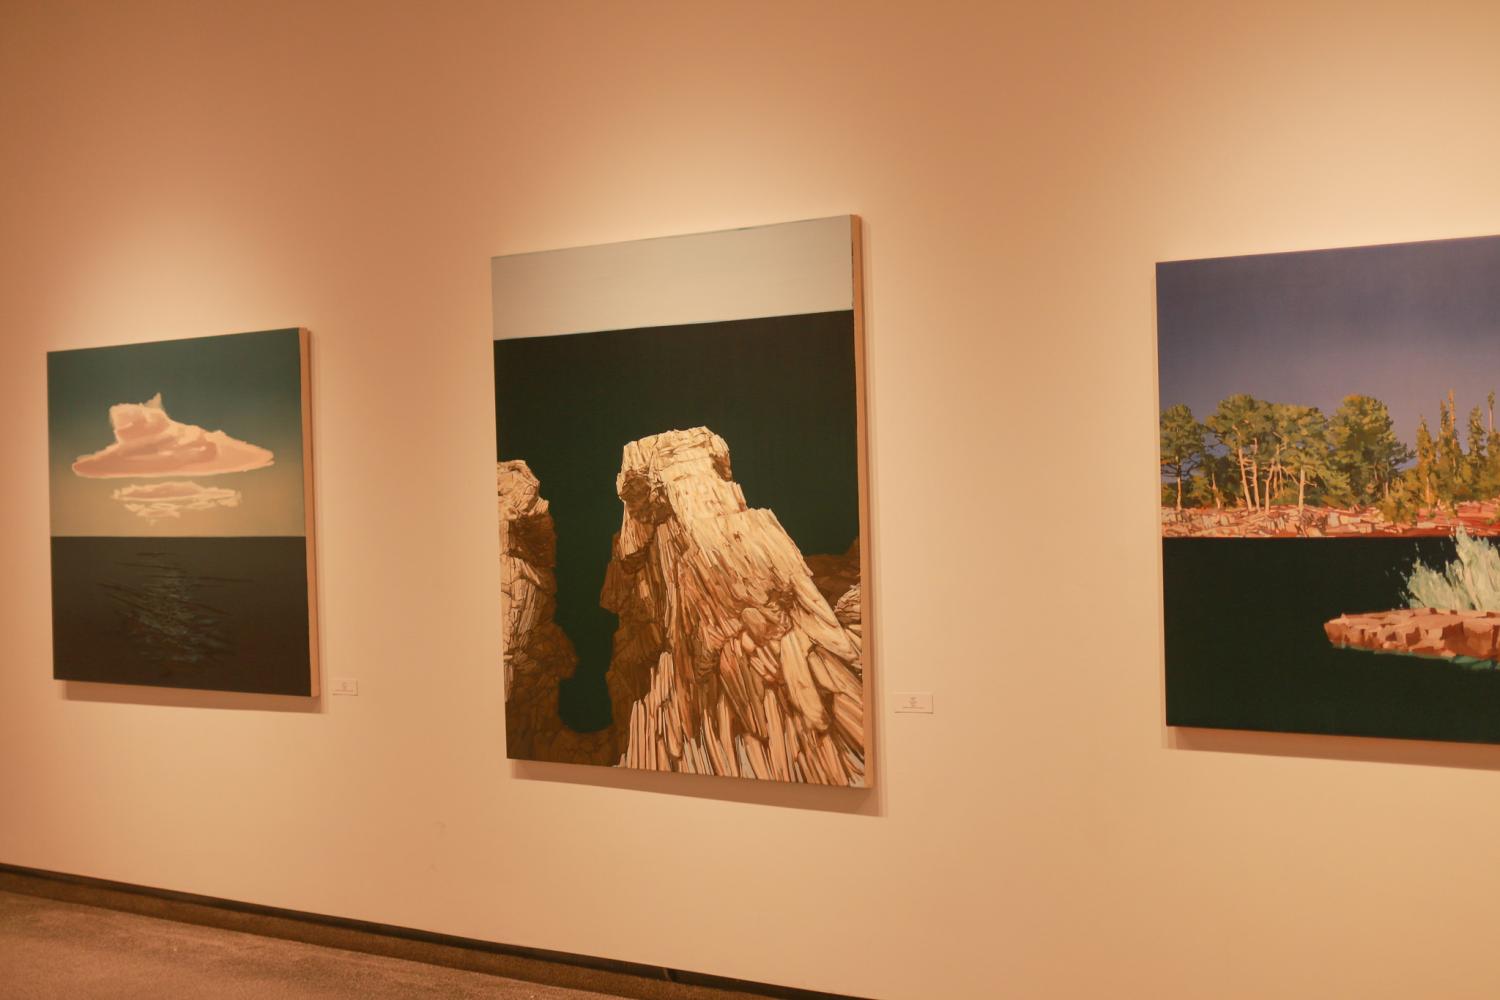 Three of Carey’s paintings show Carey’s vantage point on Rabbit Island in Lake Superior during his most recent artist residency. Carey has been selected to do artist residencies in several locations around the world, including the Arctic Circle.